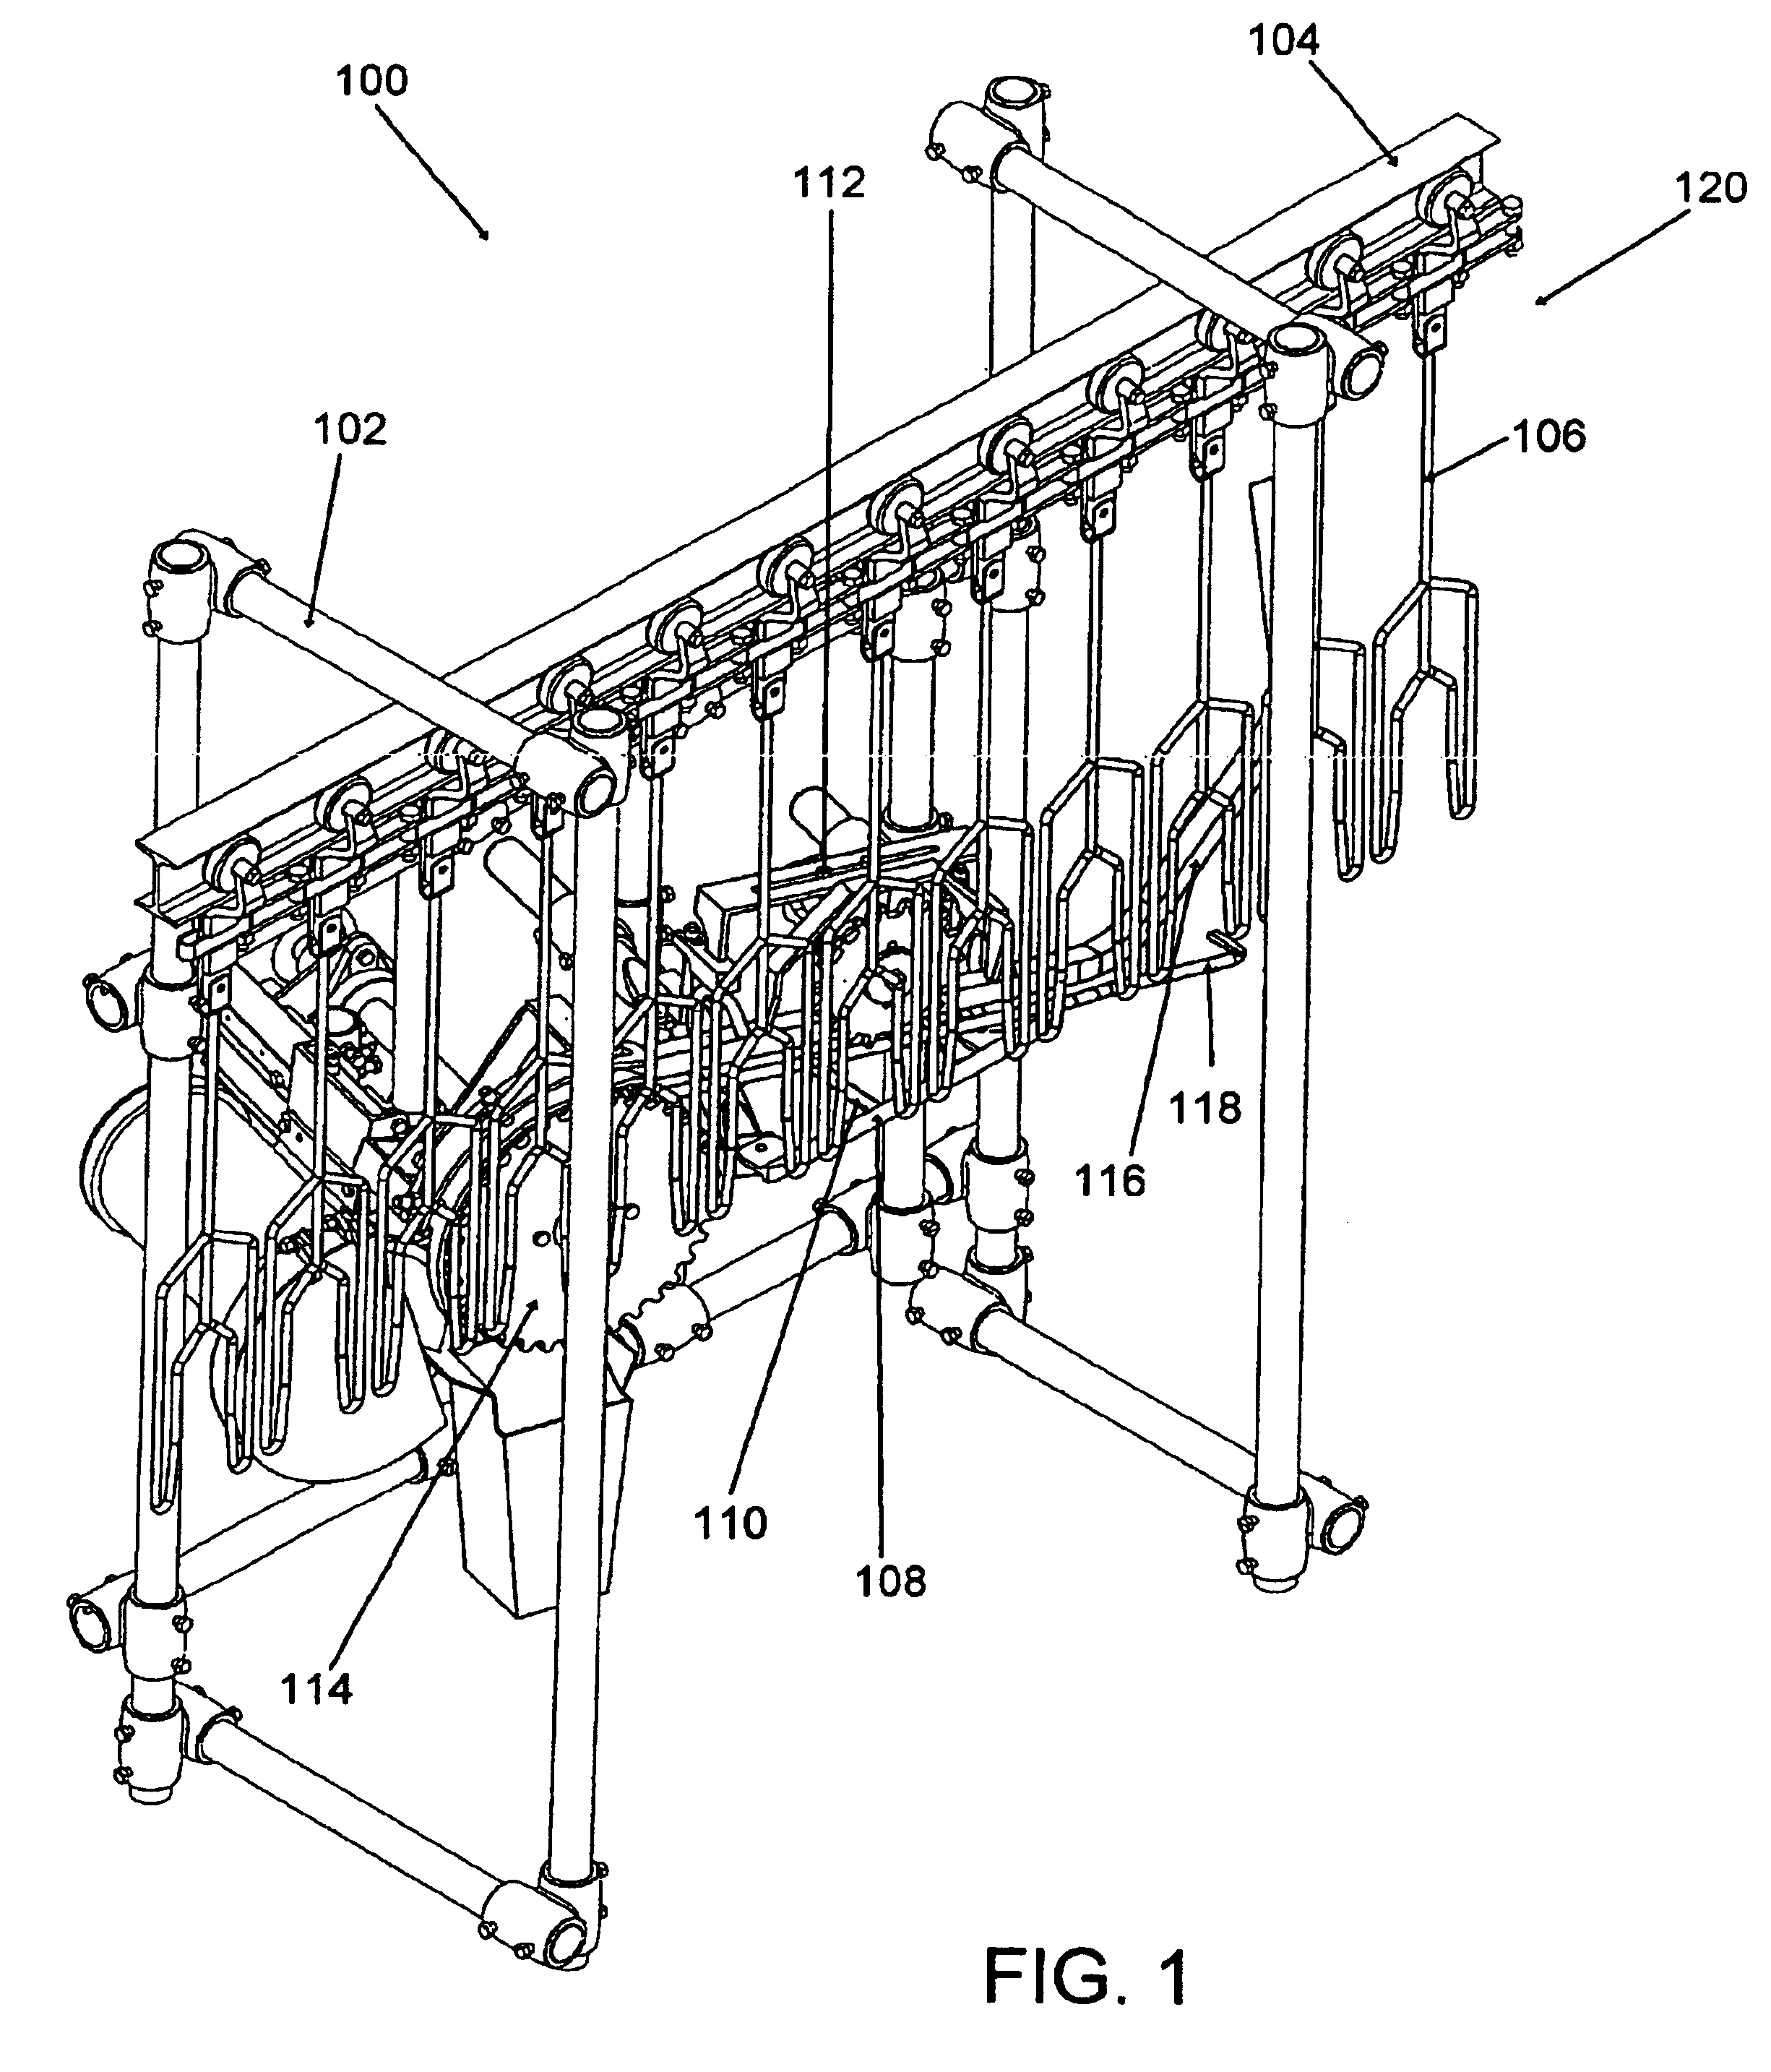 Apparatus and method of edible feet harvest and paw production